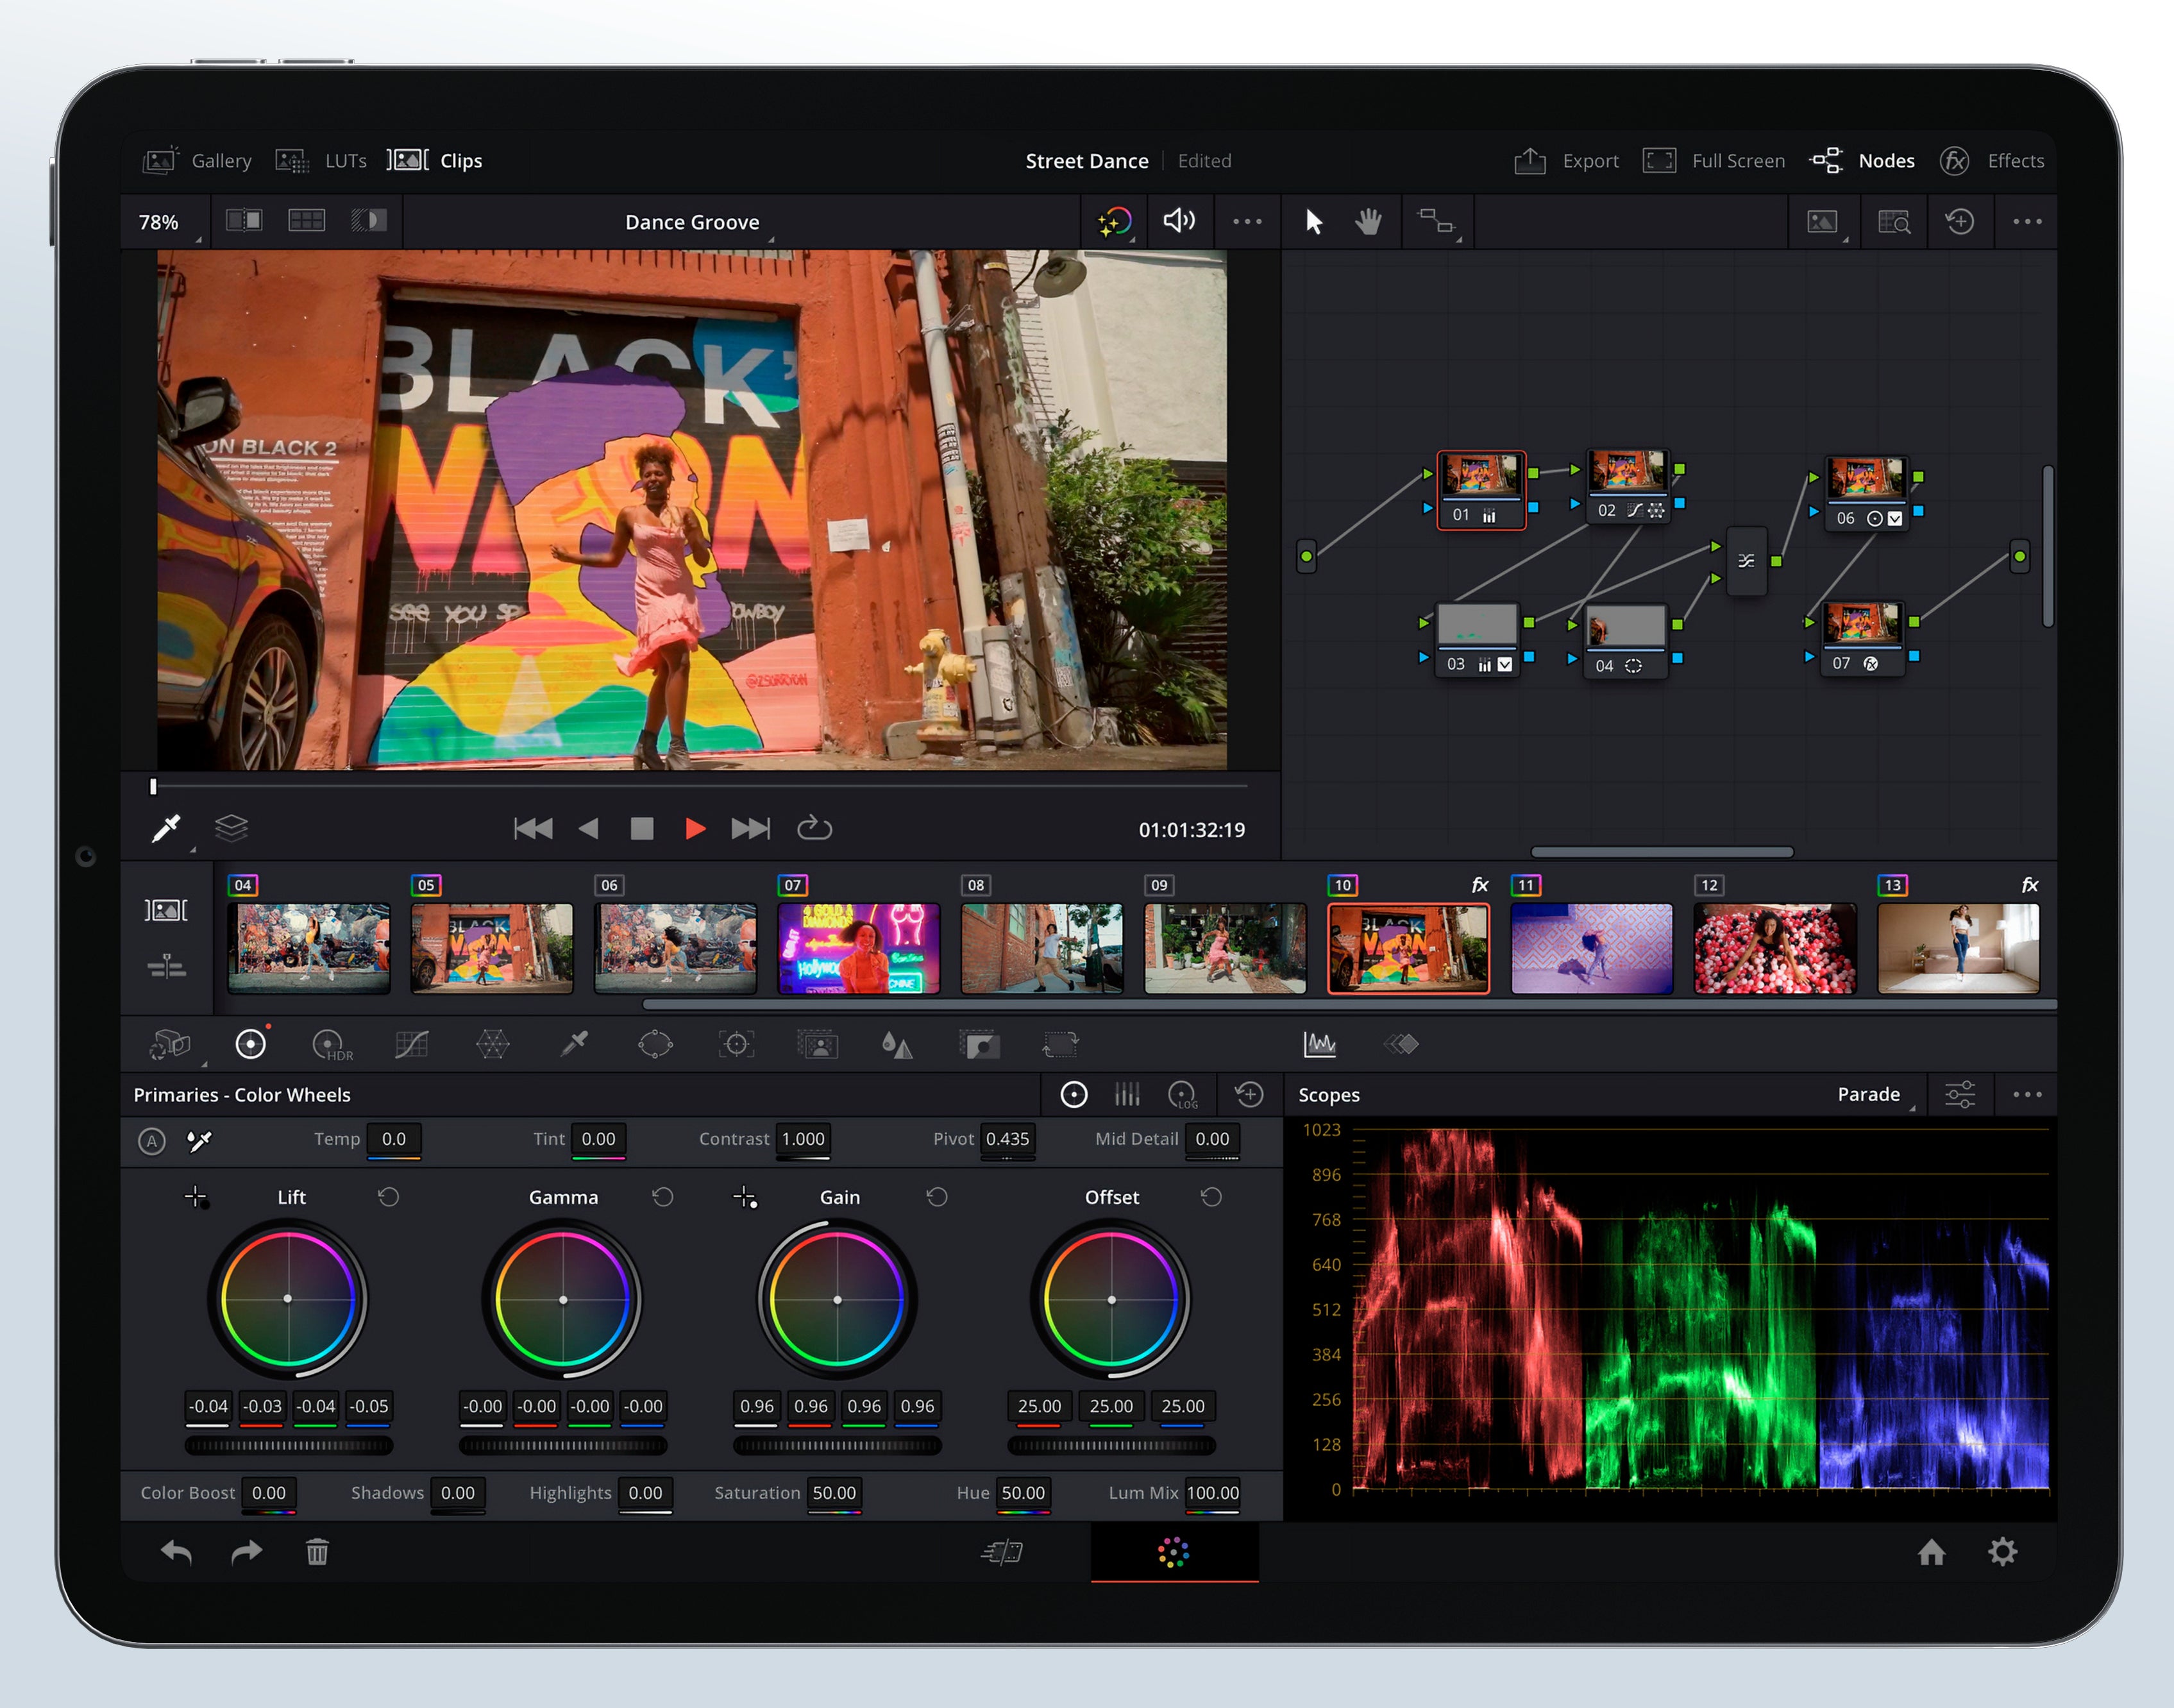 Behind every bit of this busy interface is a powerful editing tool. - High-end video editing app DaVinci Resolve for iPad is now available for free